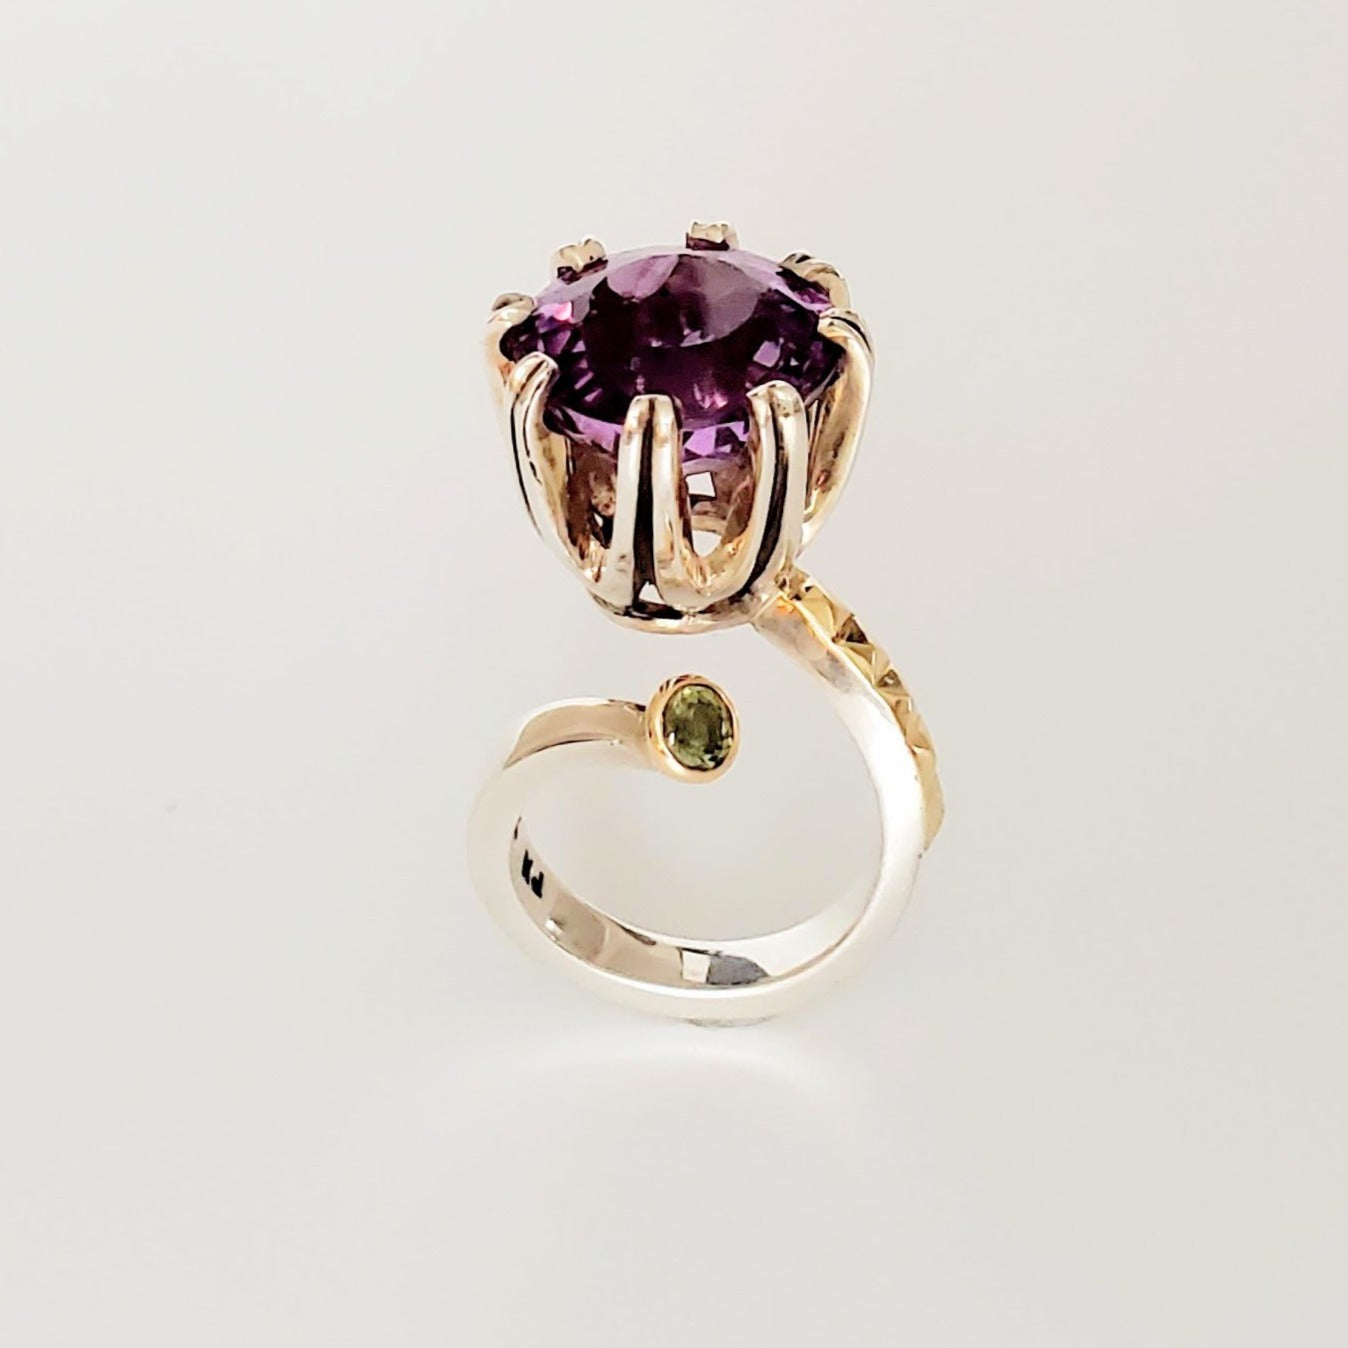 CROWNED AMETHYST WITH A SPOT OF PERIDOT IN STERLING SILVER & 14KT GOLD